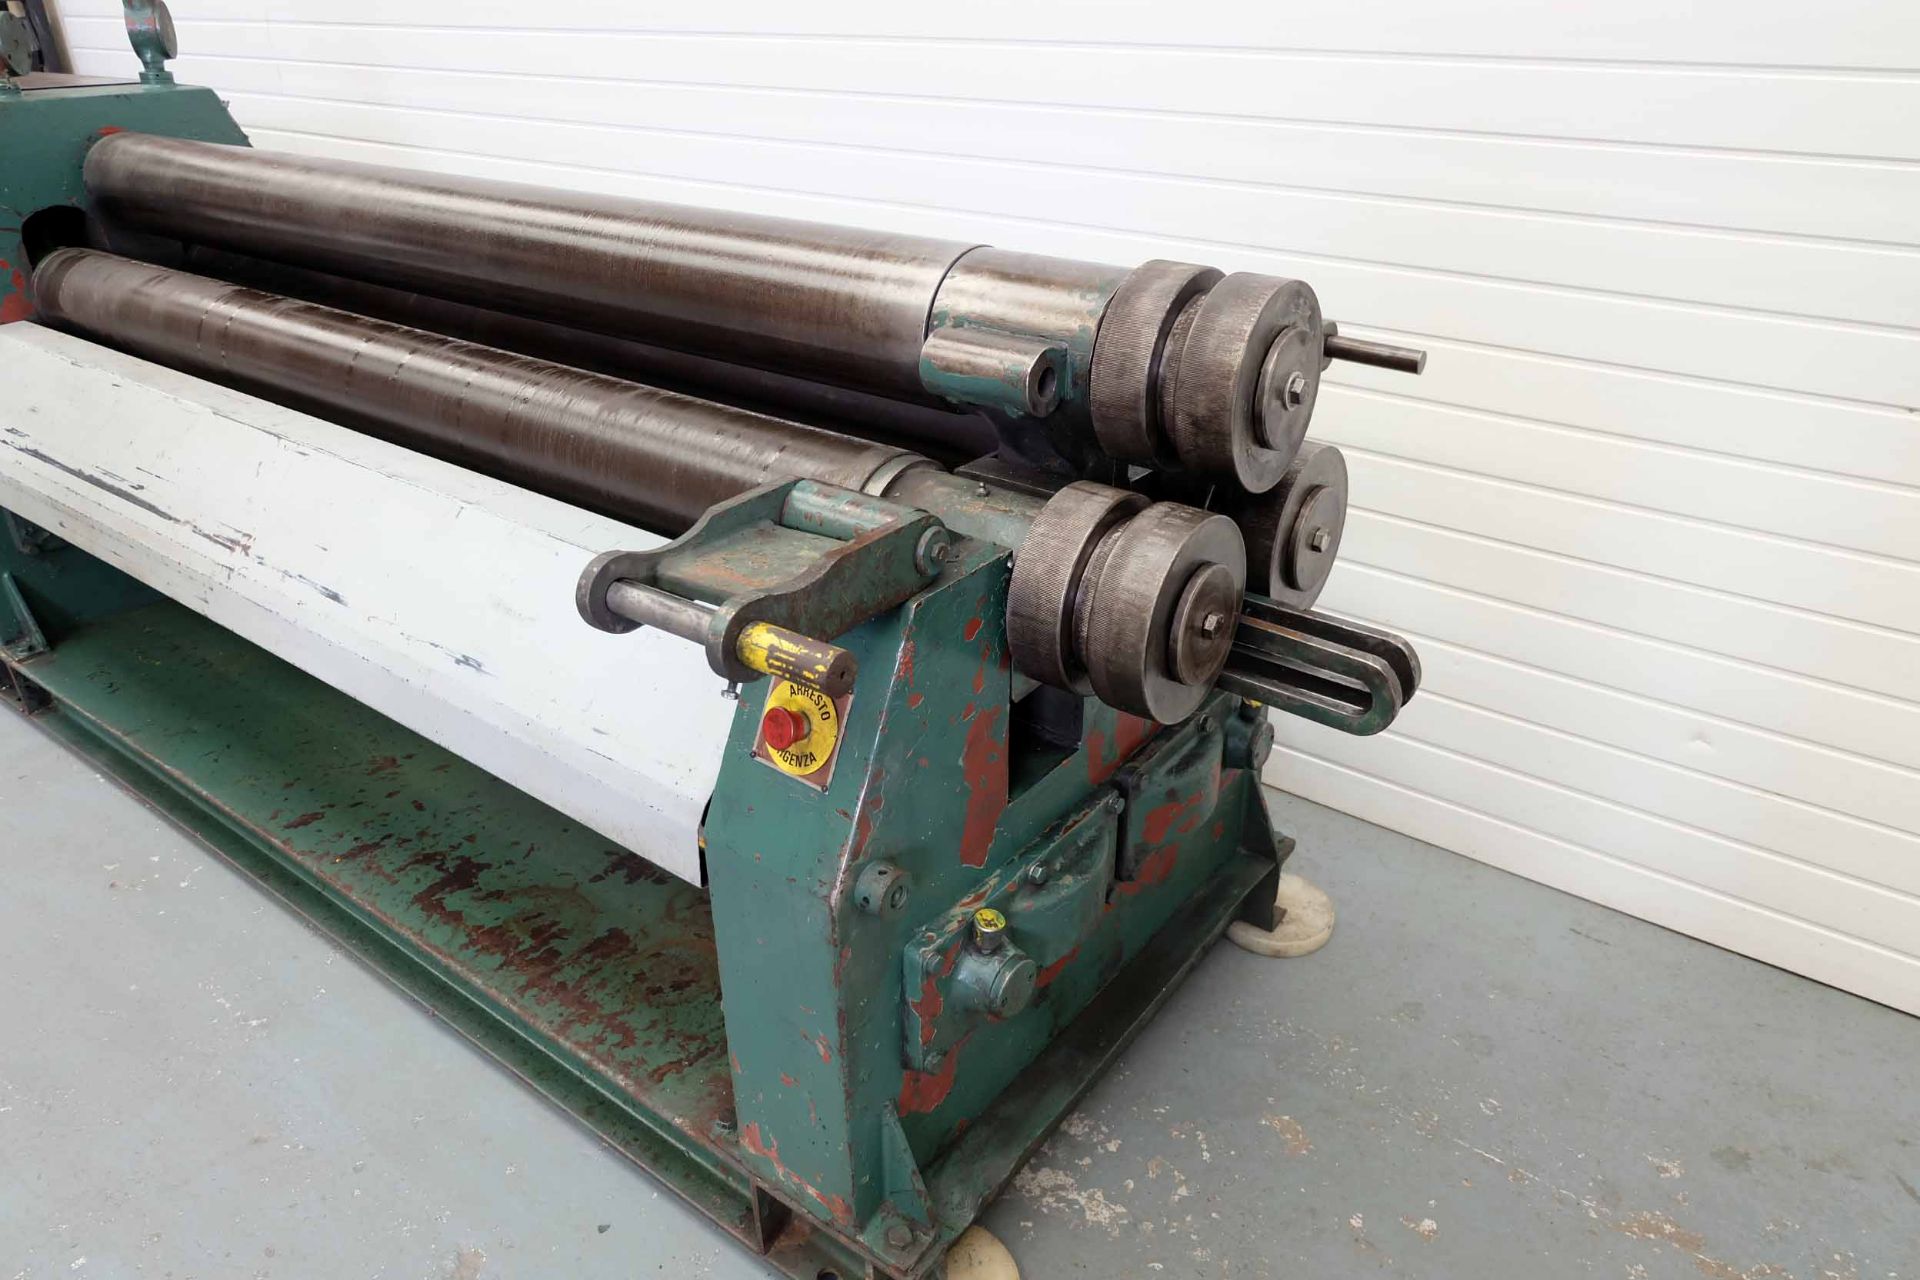 I.M.C.A.R. Powered Pyramid Sheet Metal Rolls. Length of Rolls 2050mm. Diameter of Rolls 185mm Top & - Image 10 of 15